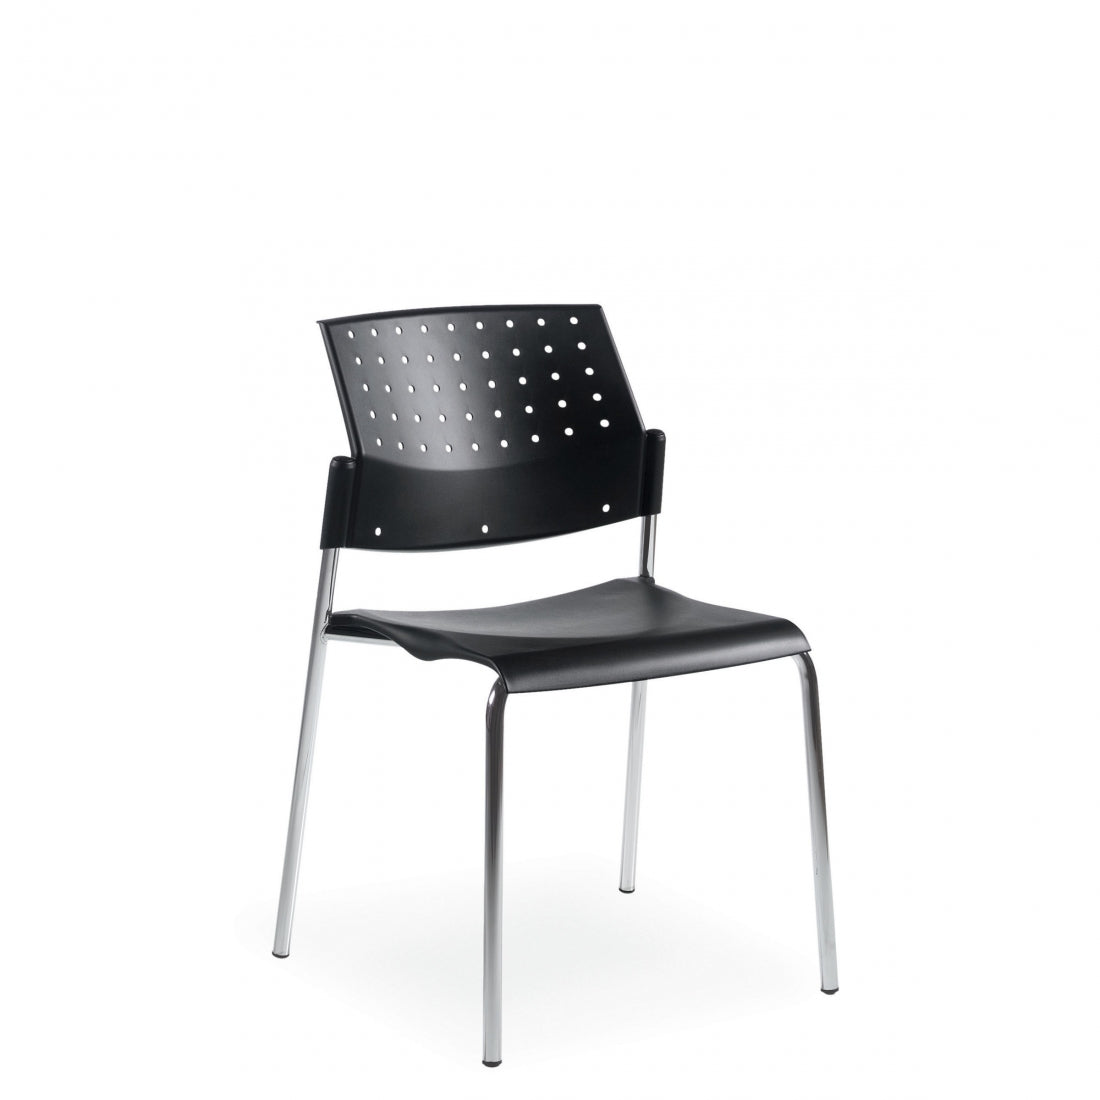 Global Sonic 6508 Armless Polypropylene Seat & Back Guest Chair, Black Seating-Guest Chair - Office Ready